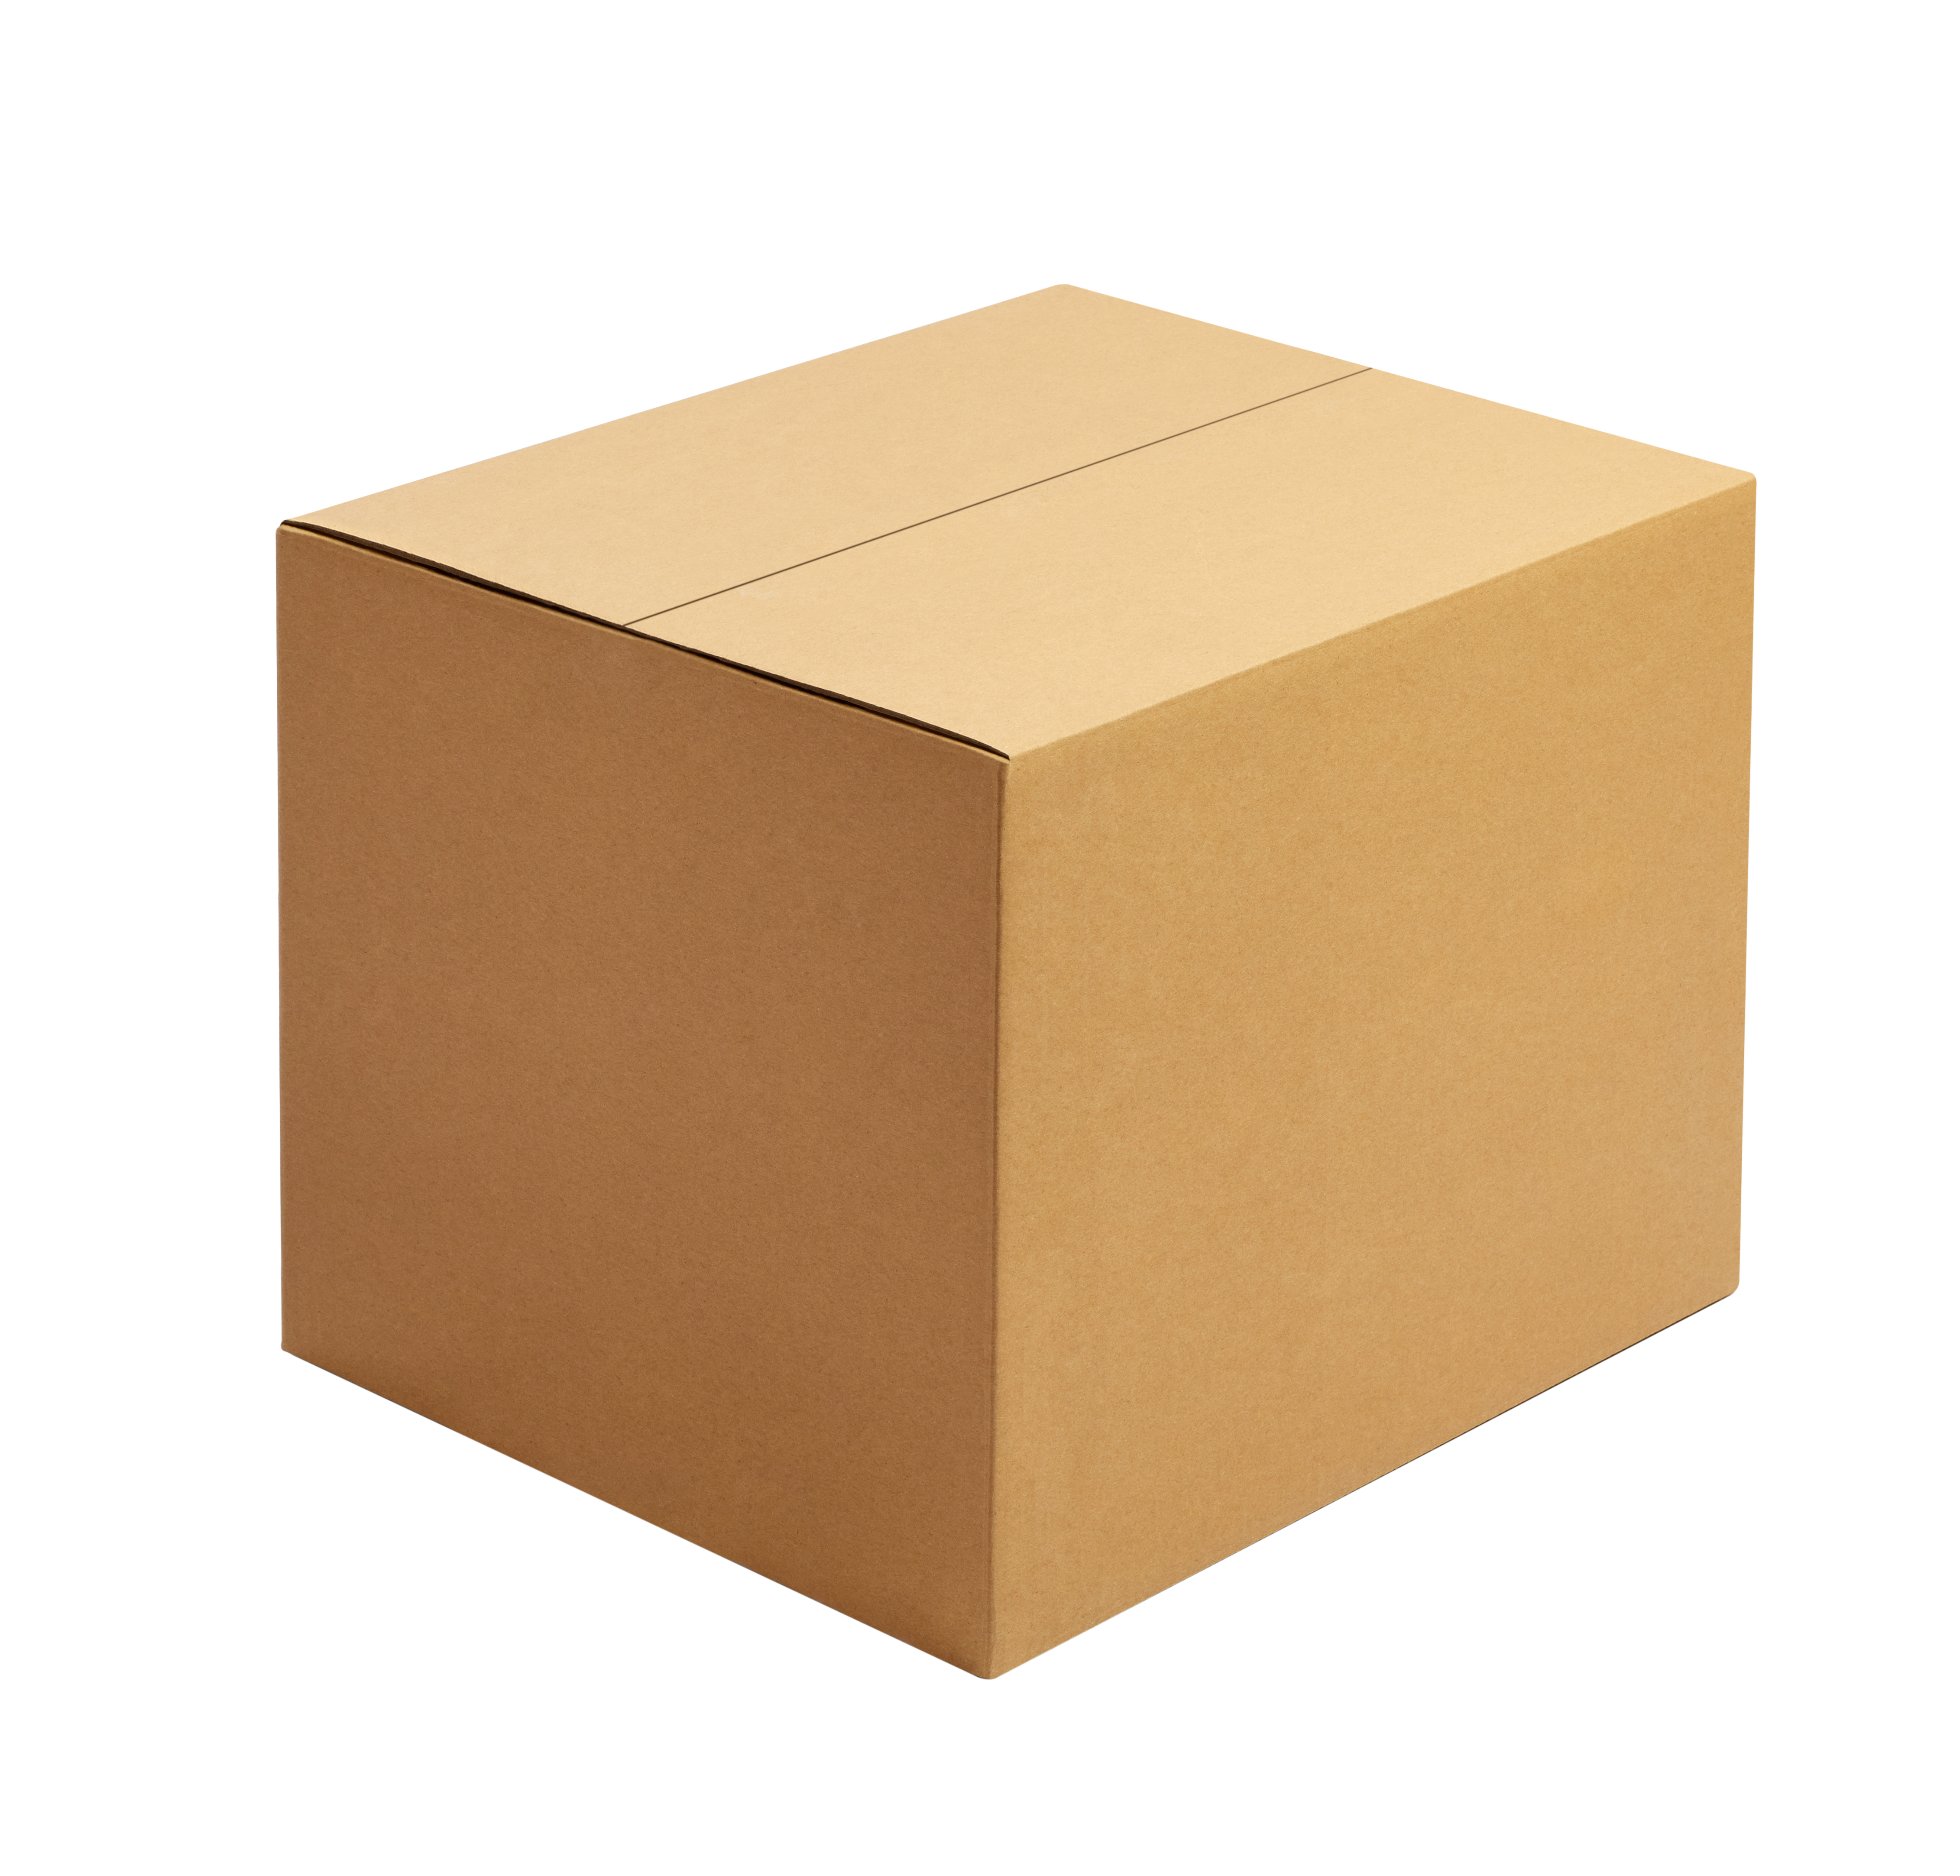 Unbranded Shipping Box (for surprise deliveries)